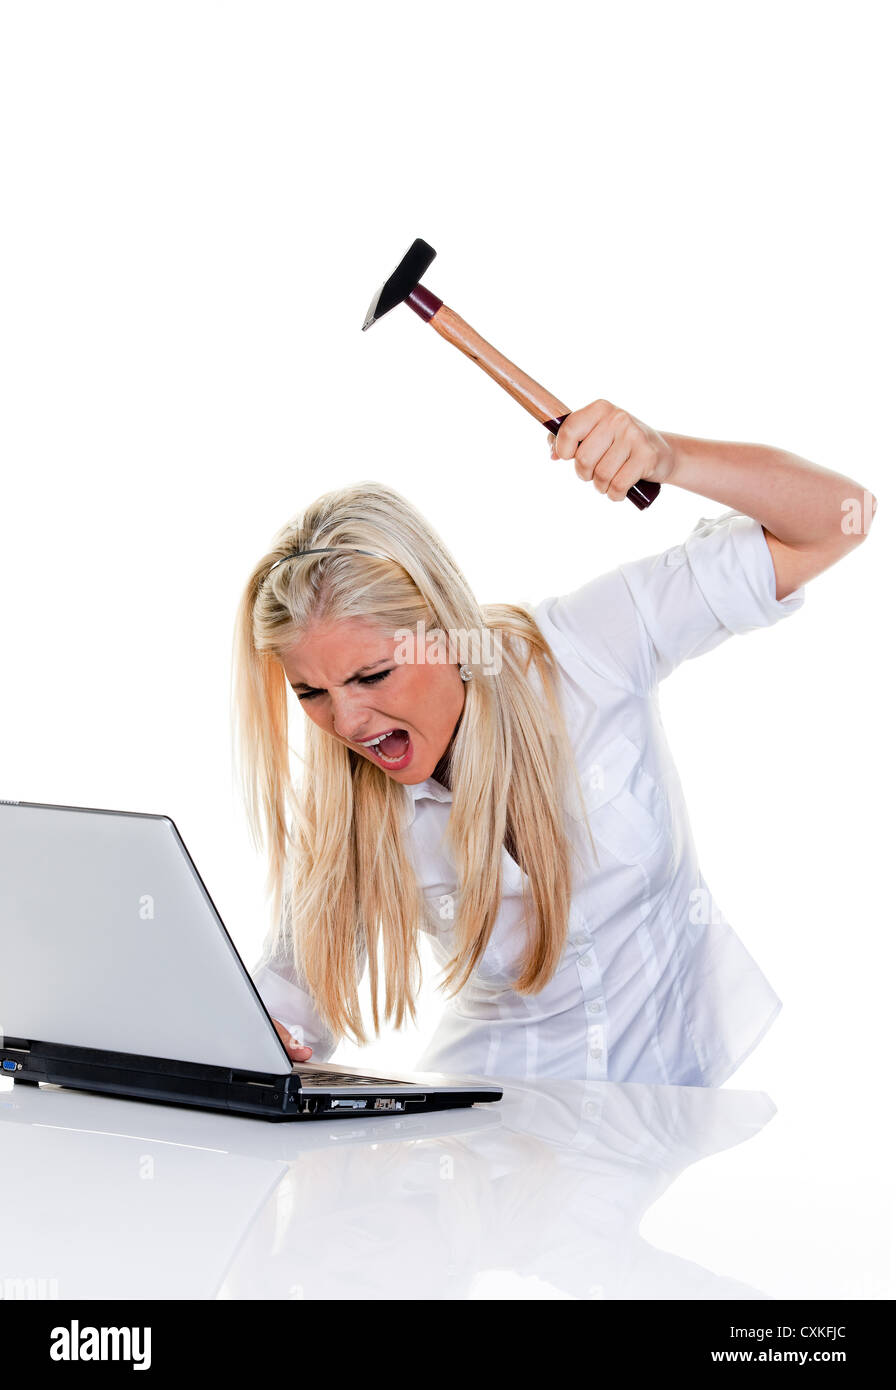 Computer and laptop problems with hammer Stock Photo